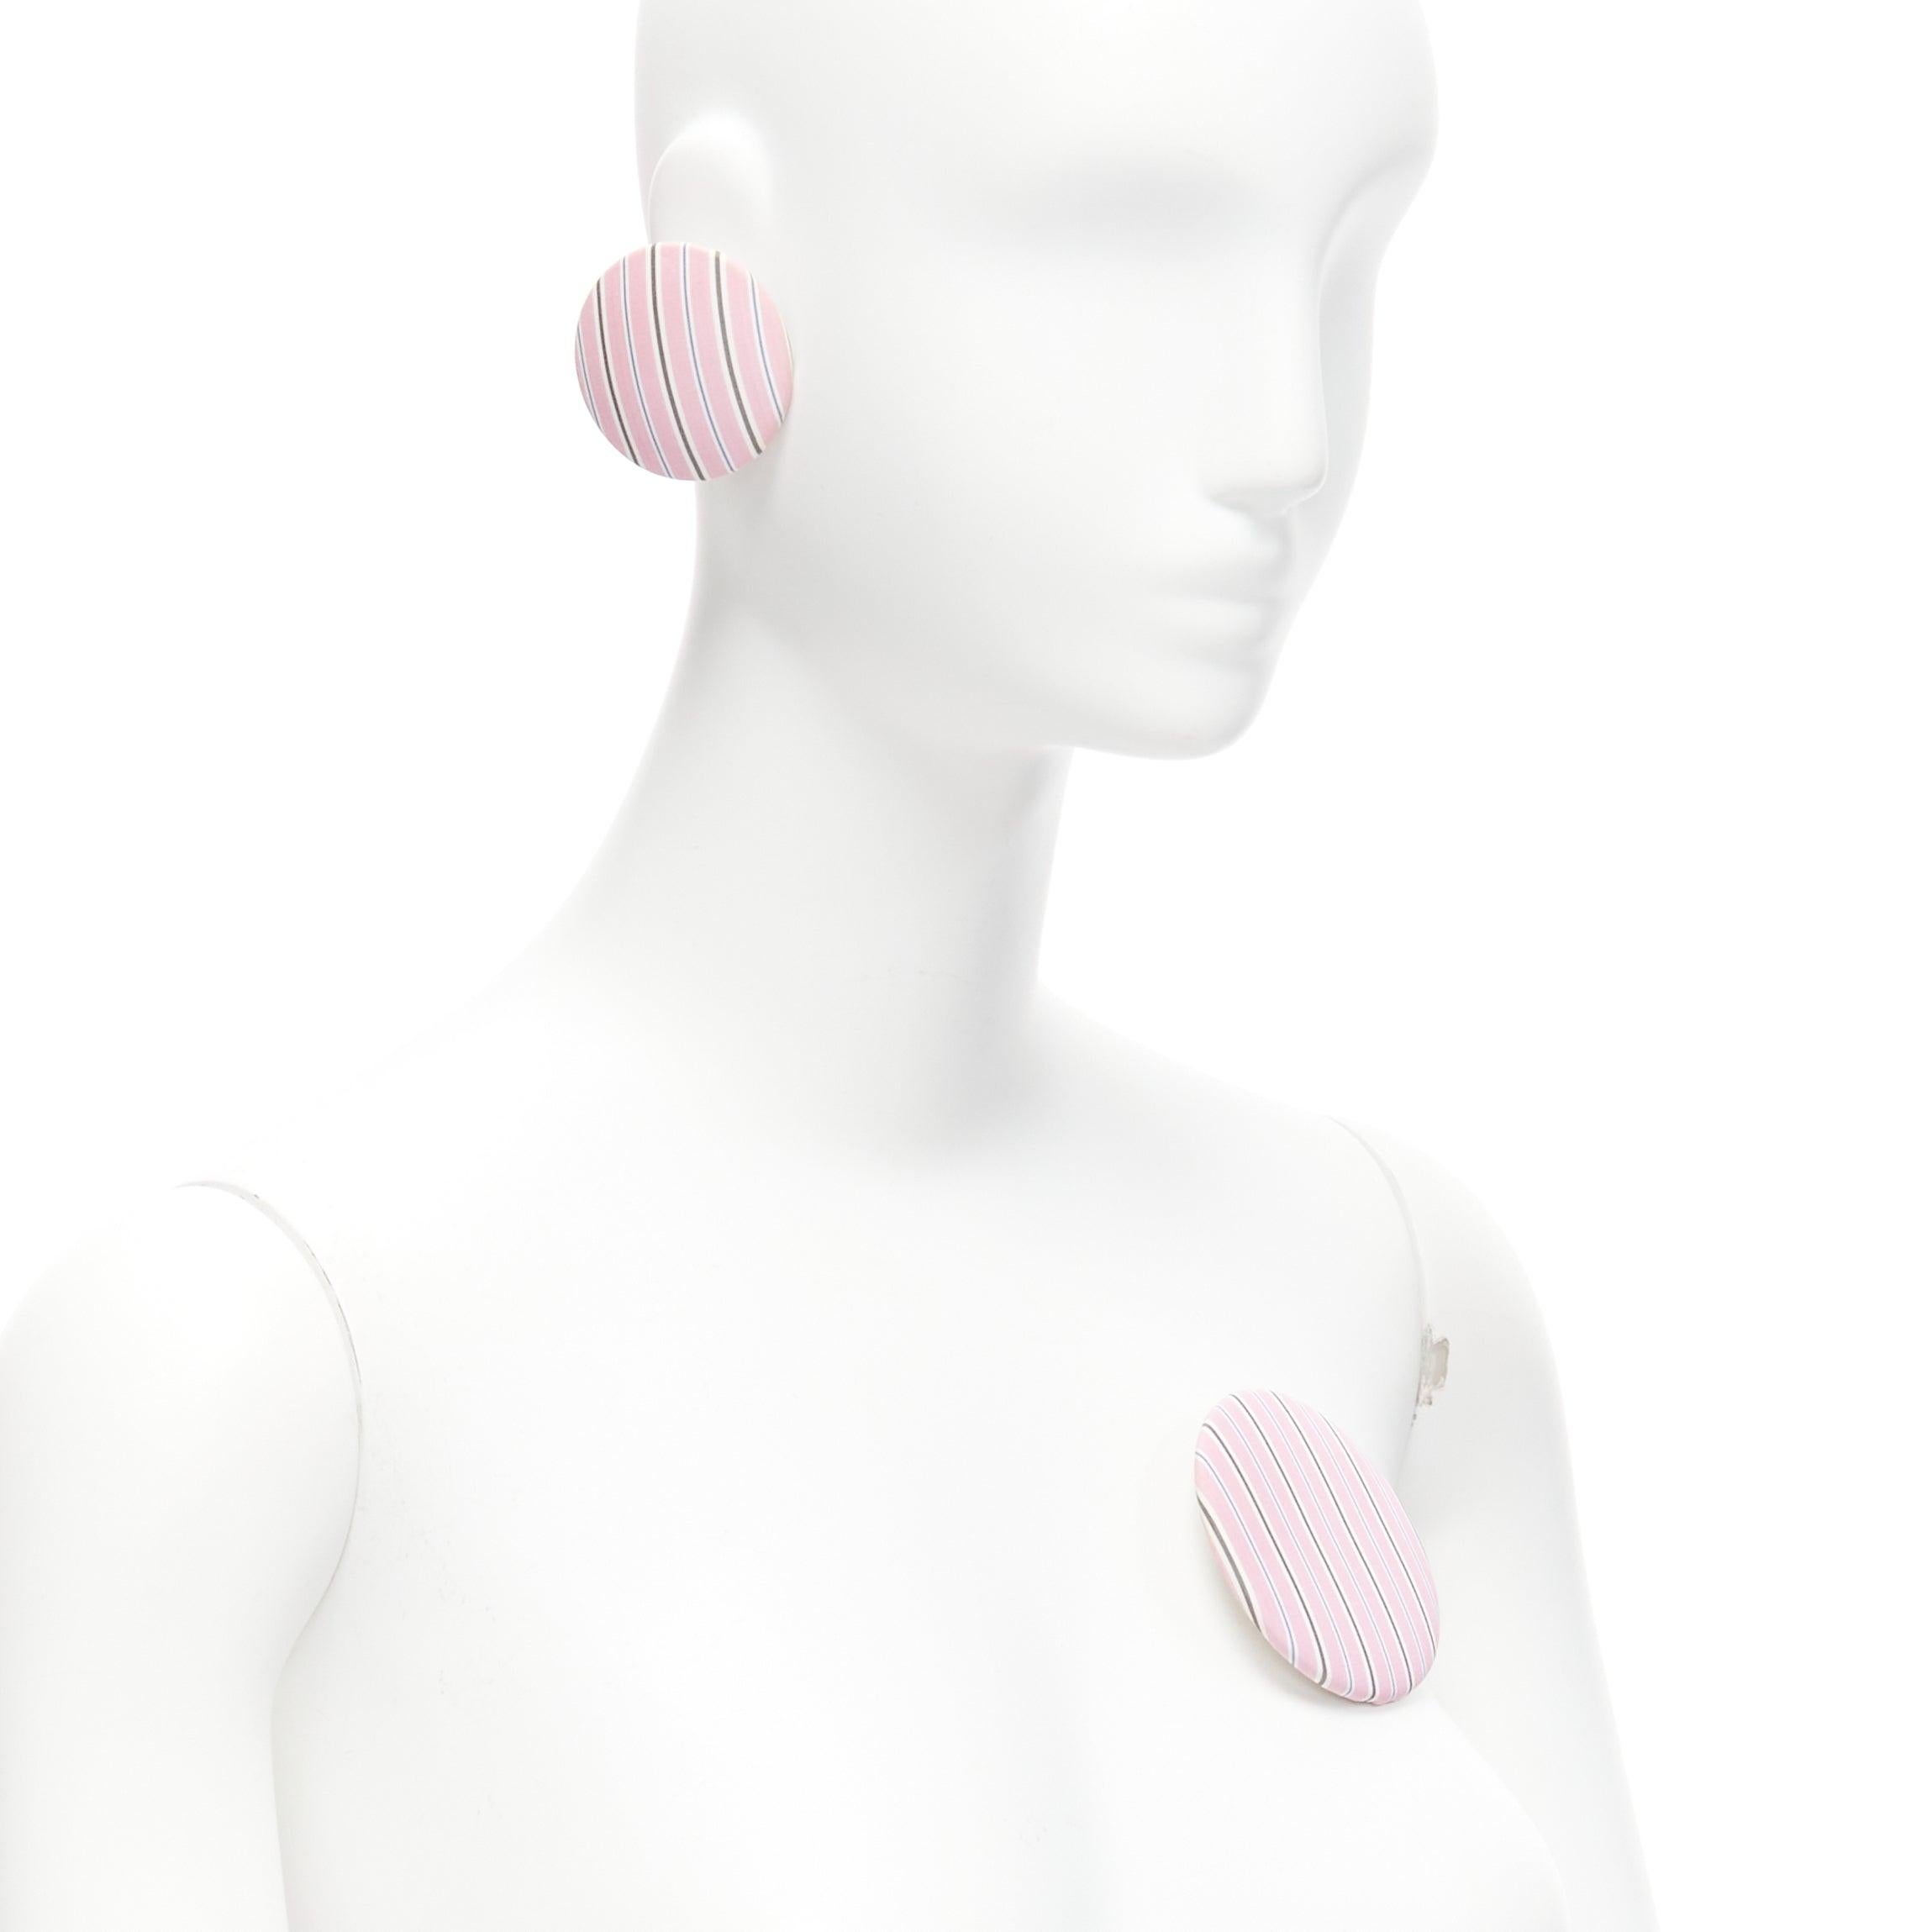 BALENCIAGA pink stripes fabric round badges studs earrings Set 3
Reference: BSHW/A00111
Brand: Balenciaga
Designer: Demna
Material: Fabric
Color: Pink
Pattern: Striped
Closure: Pin
Lining: Silver Metal
Extra Details: All 3 can be worn as pin brooch